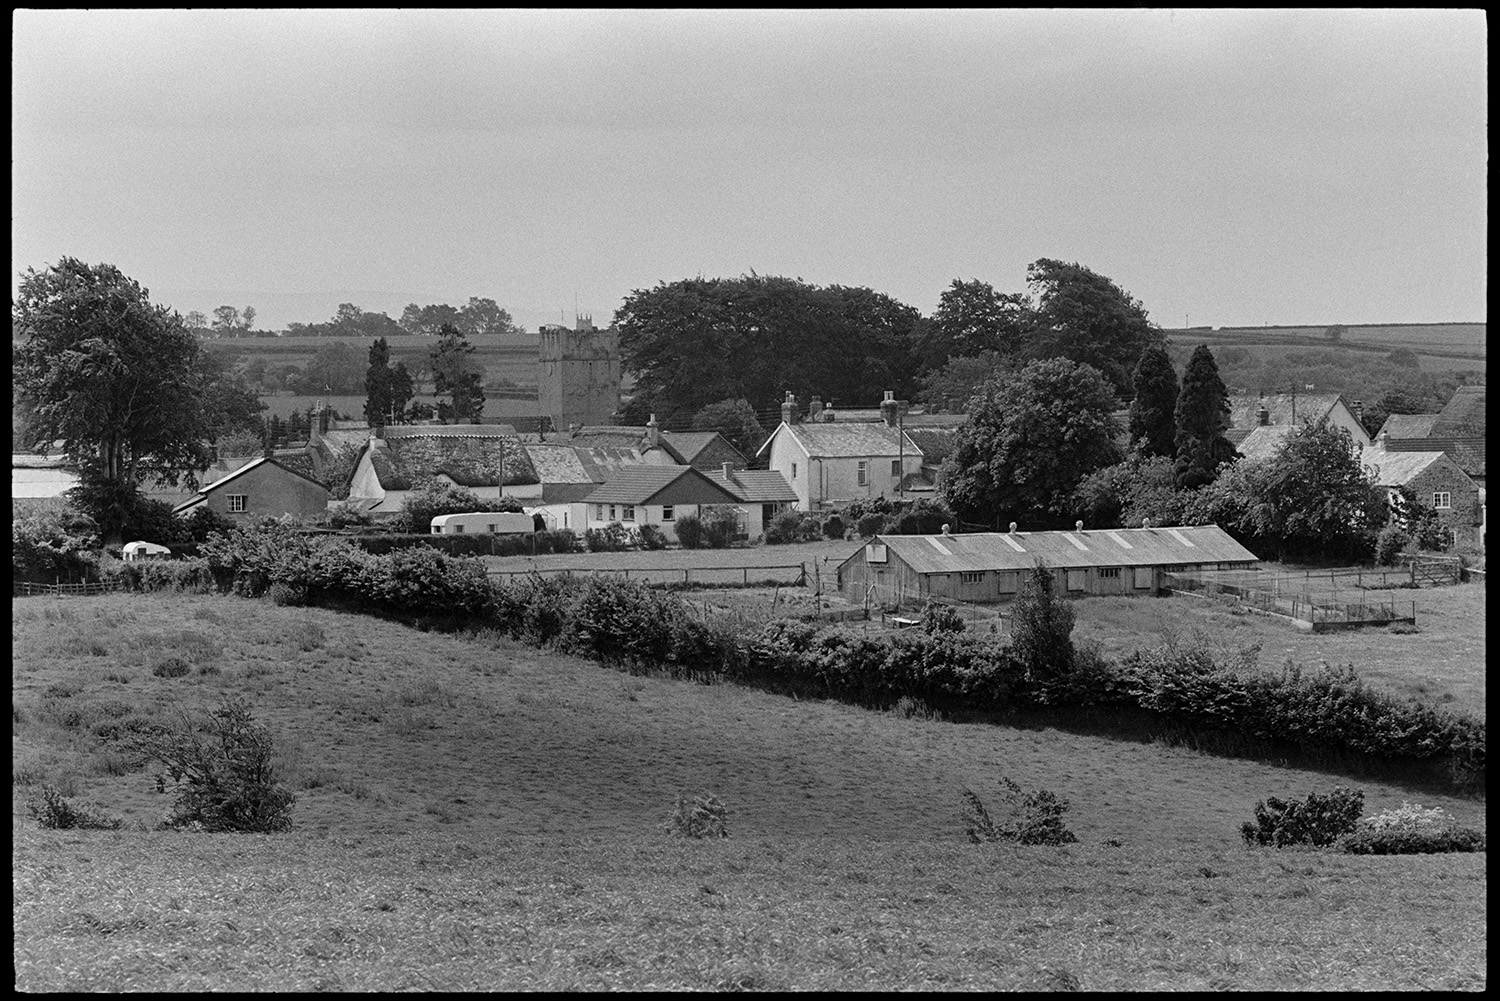 A view of Dolton with fields, houses and the church tower. James Ravilious took this image as a test shot to experiment with a new lens.